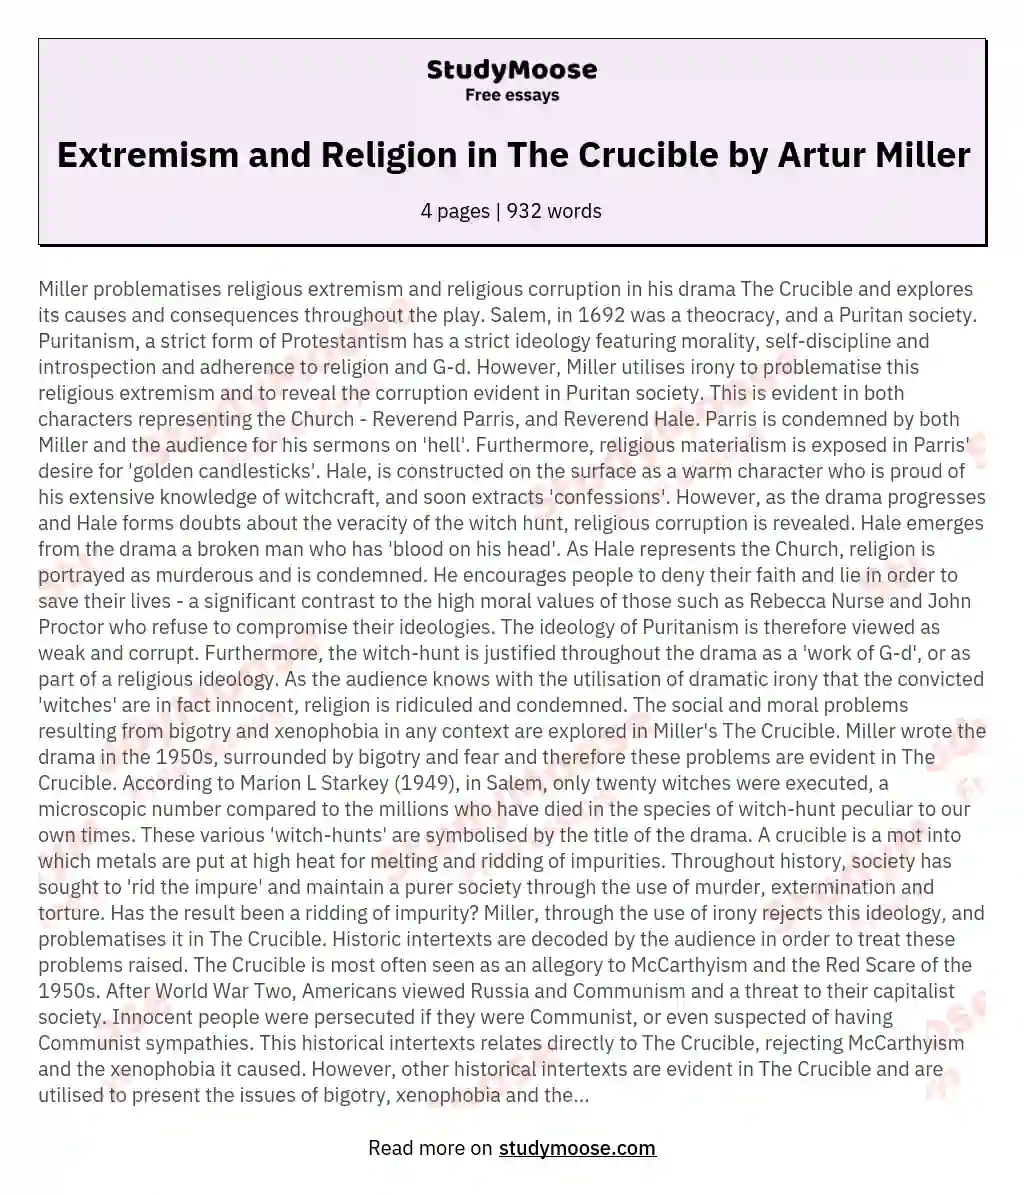 religion in the crucible